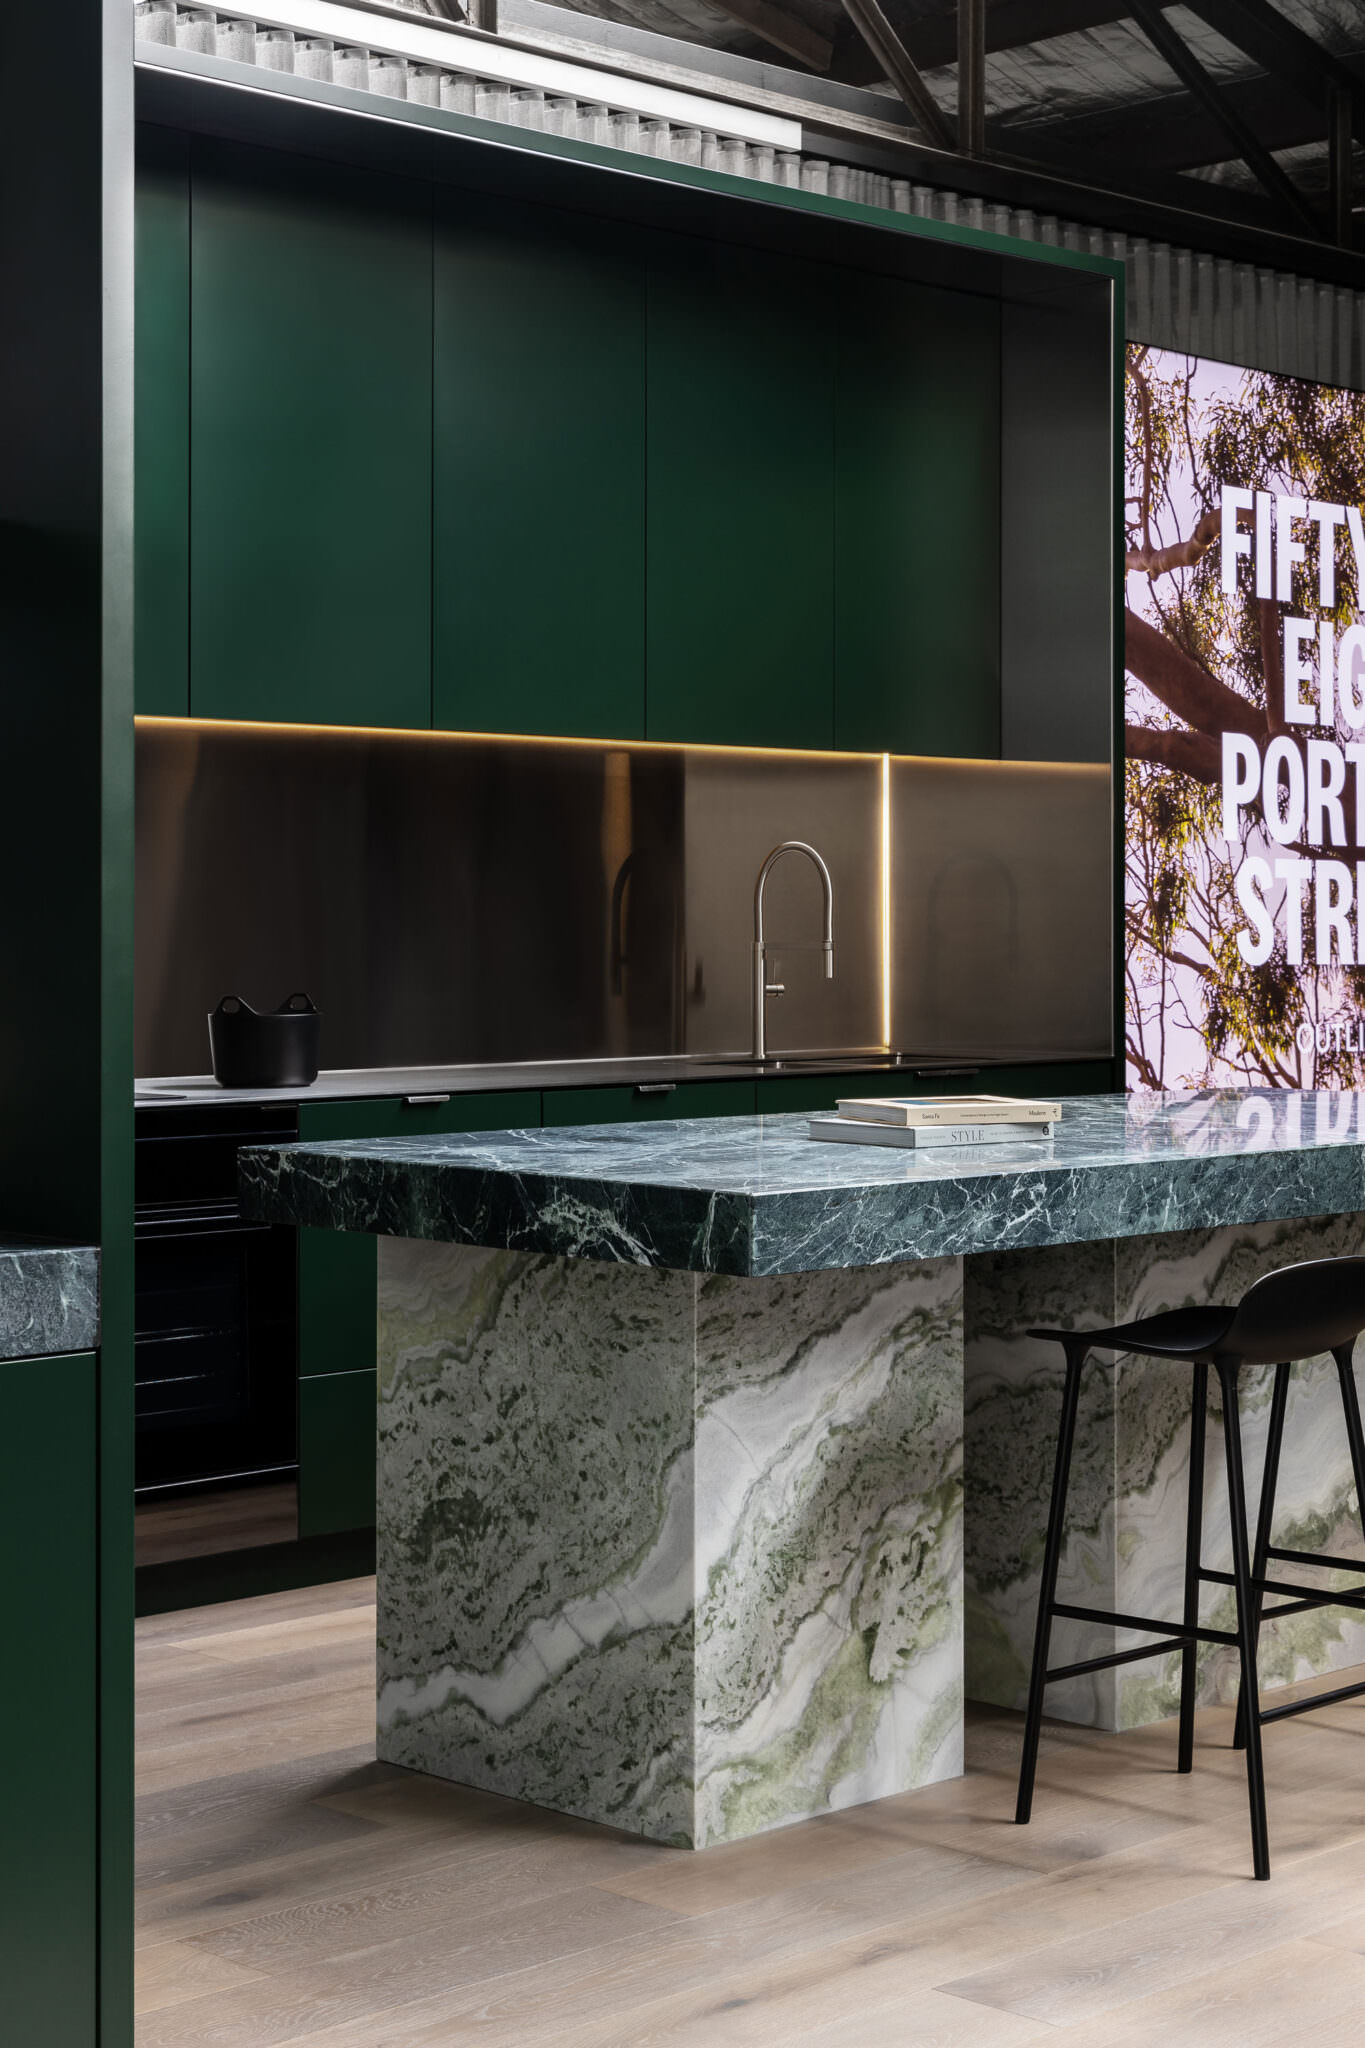 Contemporary kitchen with marble island bench and green cabinetry #architecture #interiors #interiordesign #modern #contemporary #kitchen #design #kitchendesign #marble